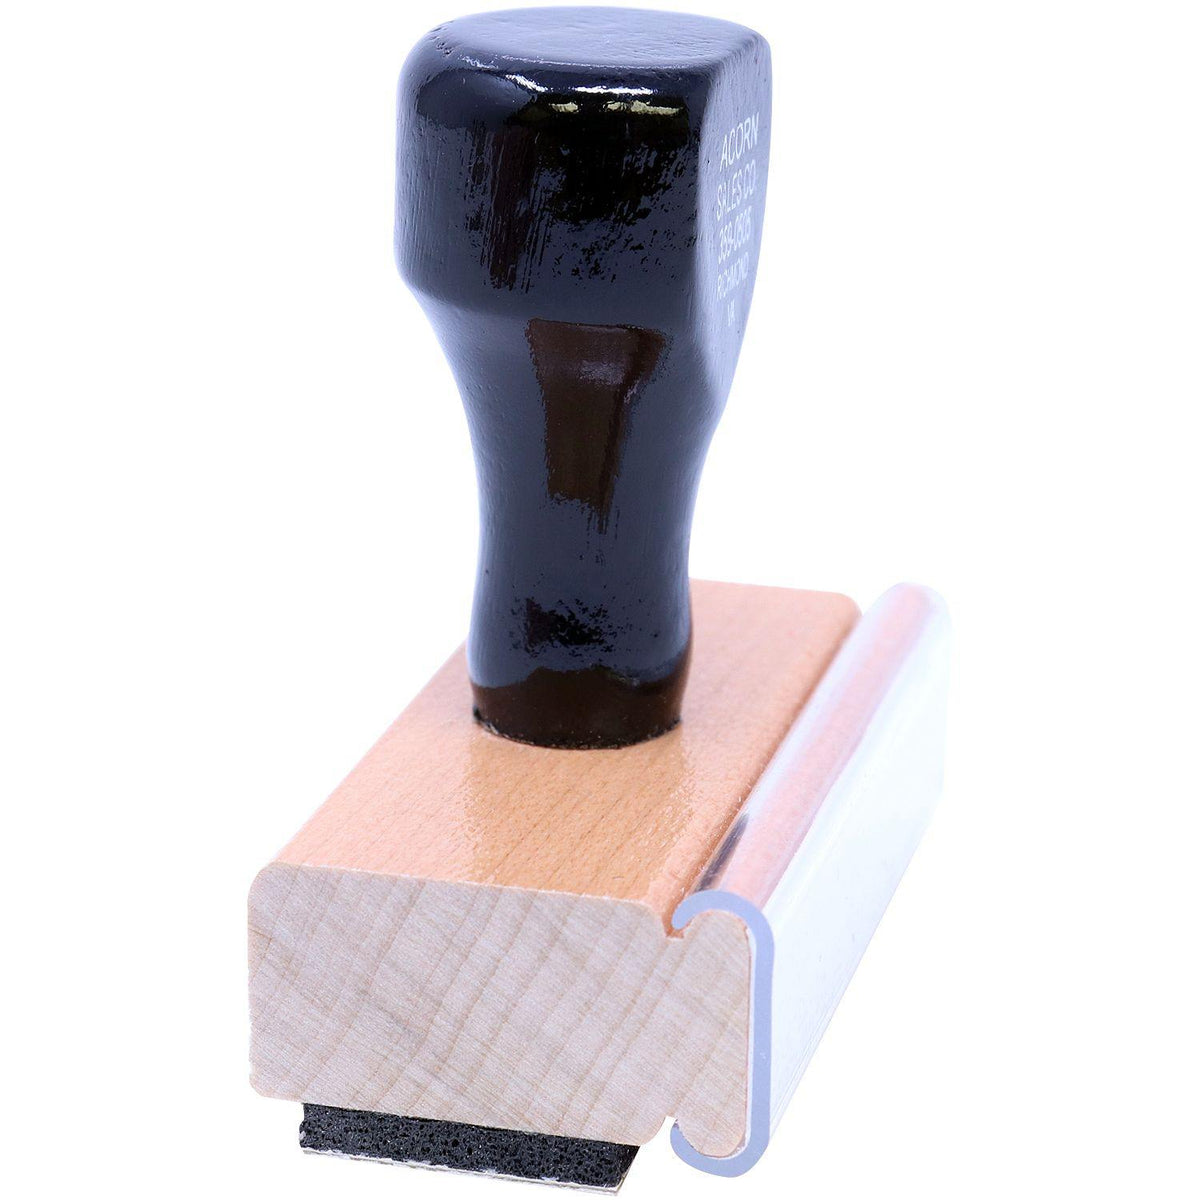 Side View of First Class Mail International Rubber Stamp at an Angle